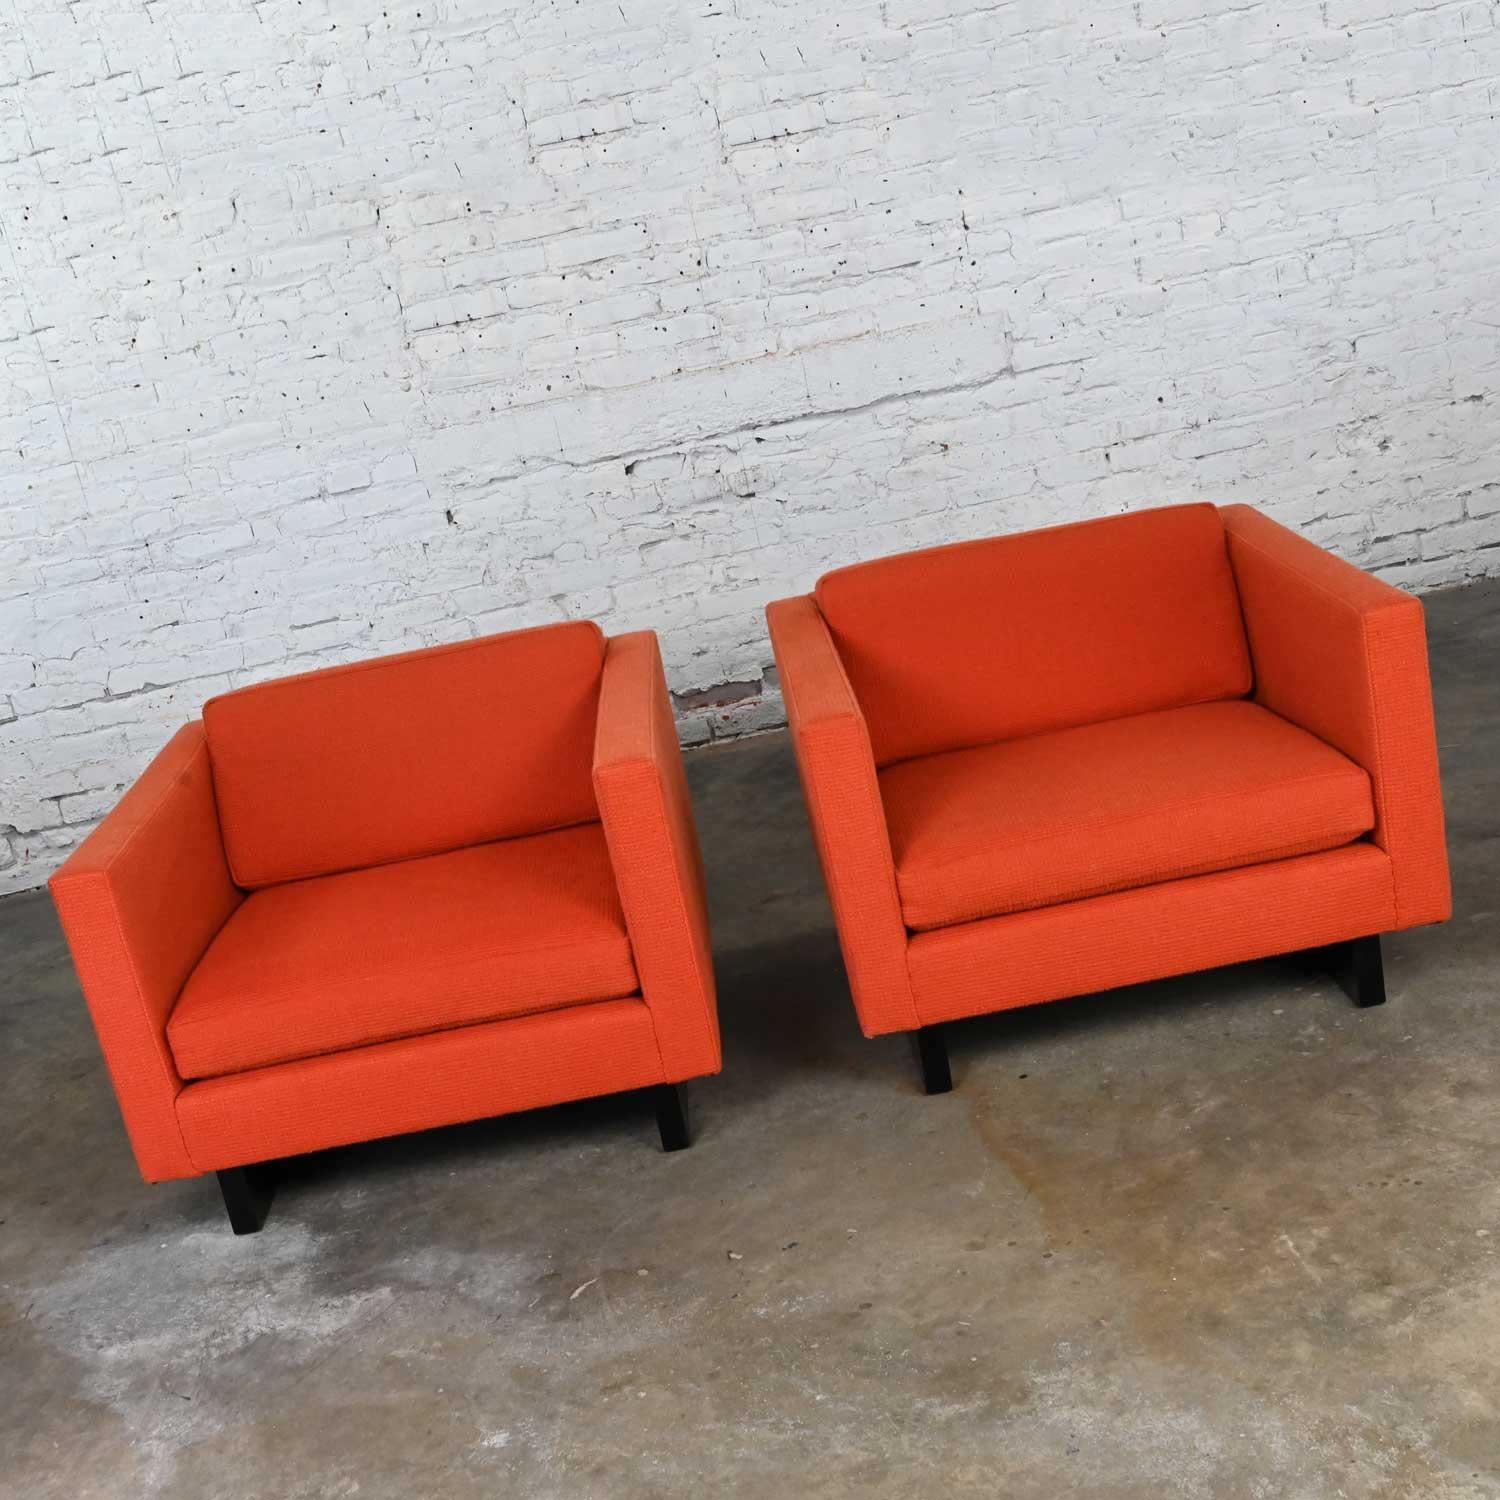 Magnificent vintage MCM (a.k.a. Mid-Century Modern) to Modern Harvey Probber orange tuxedo style 1571 club chairs with black painted sleigh bases, a pair. Beautiful condition, keeping in mind that they are vintage and not new so will have signs of